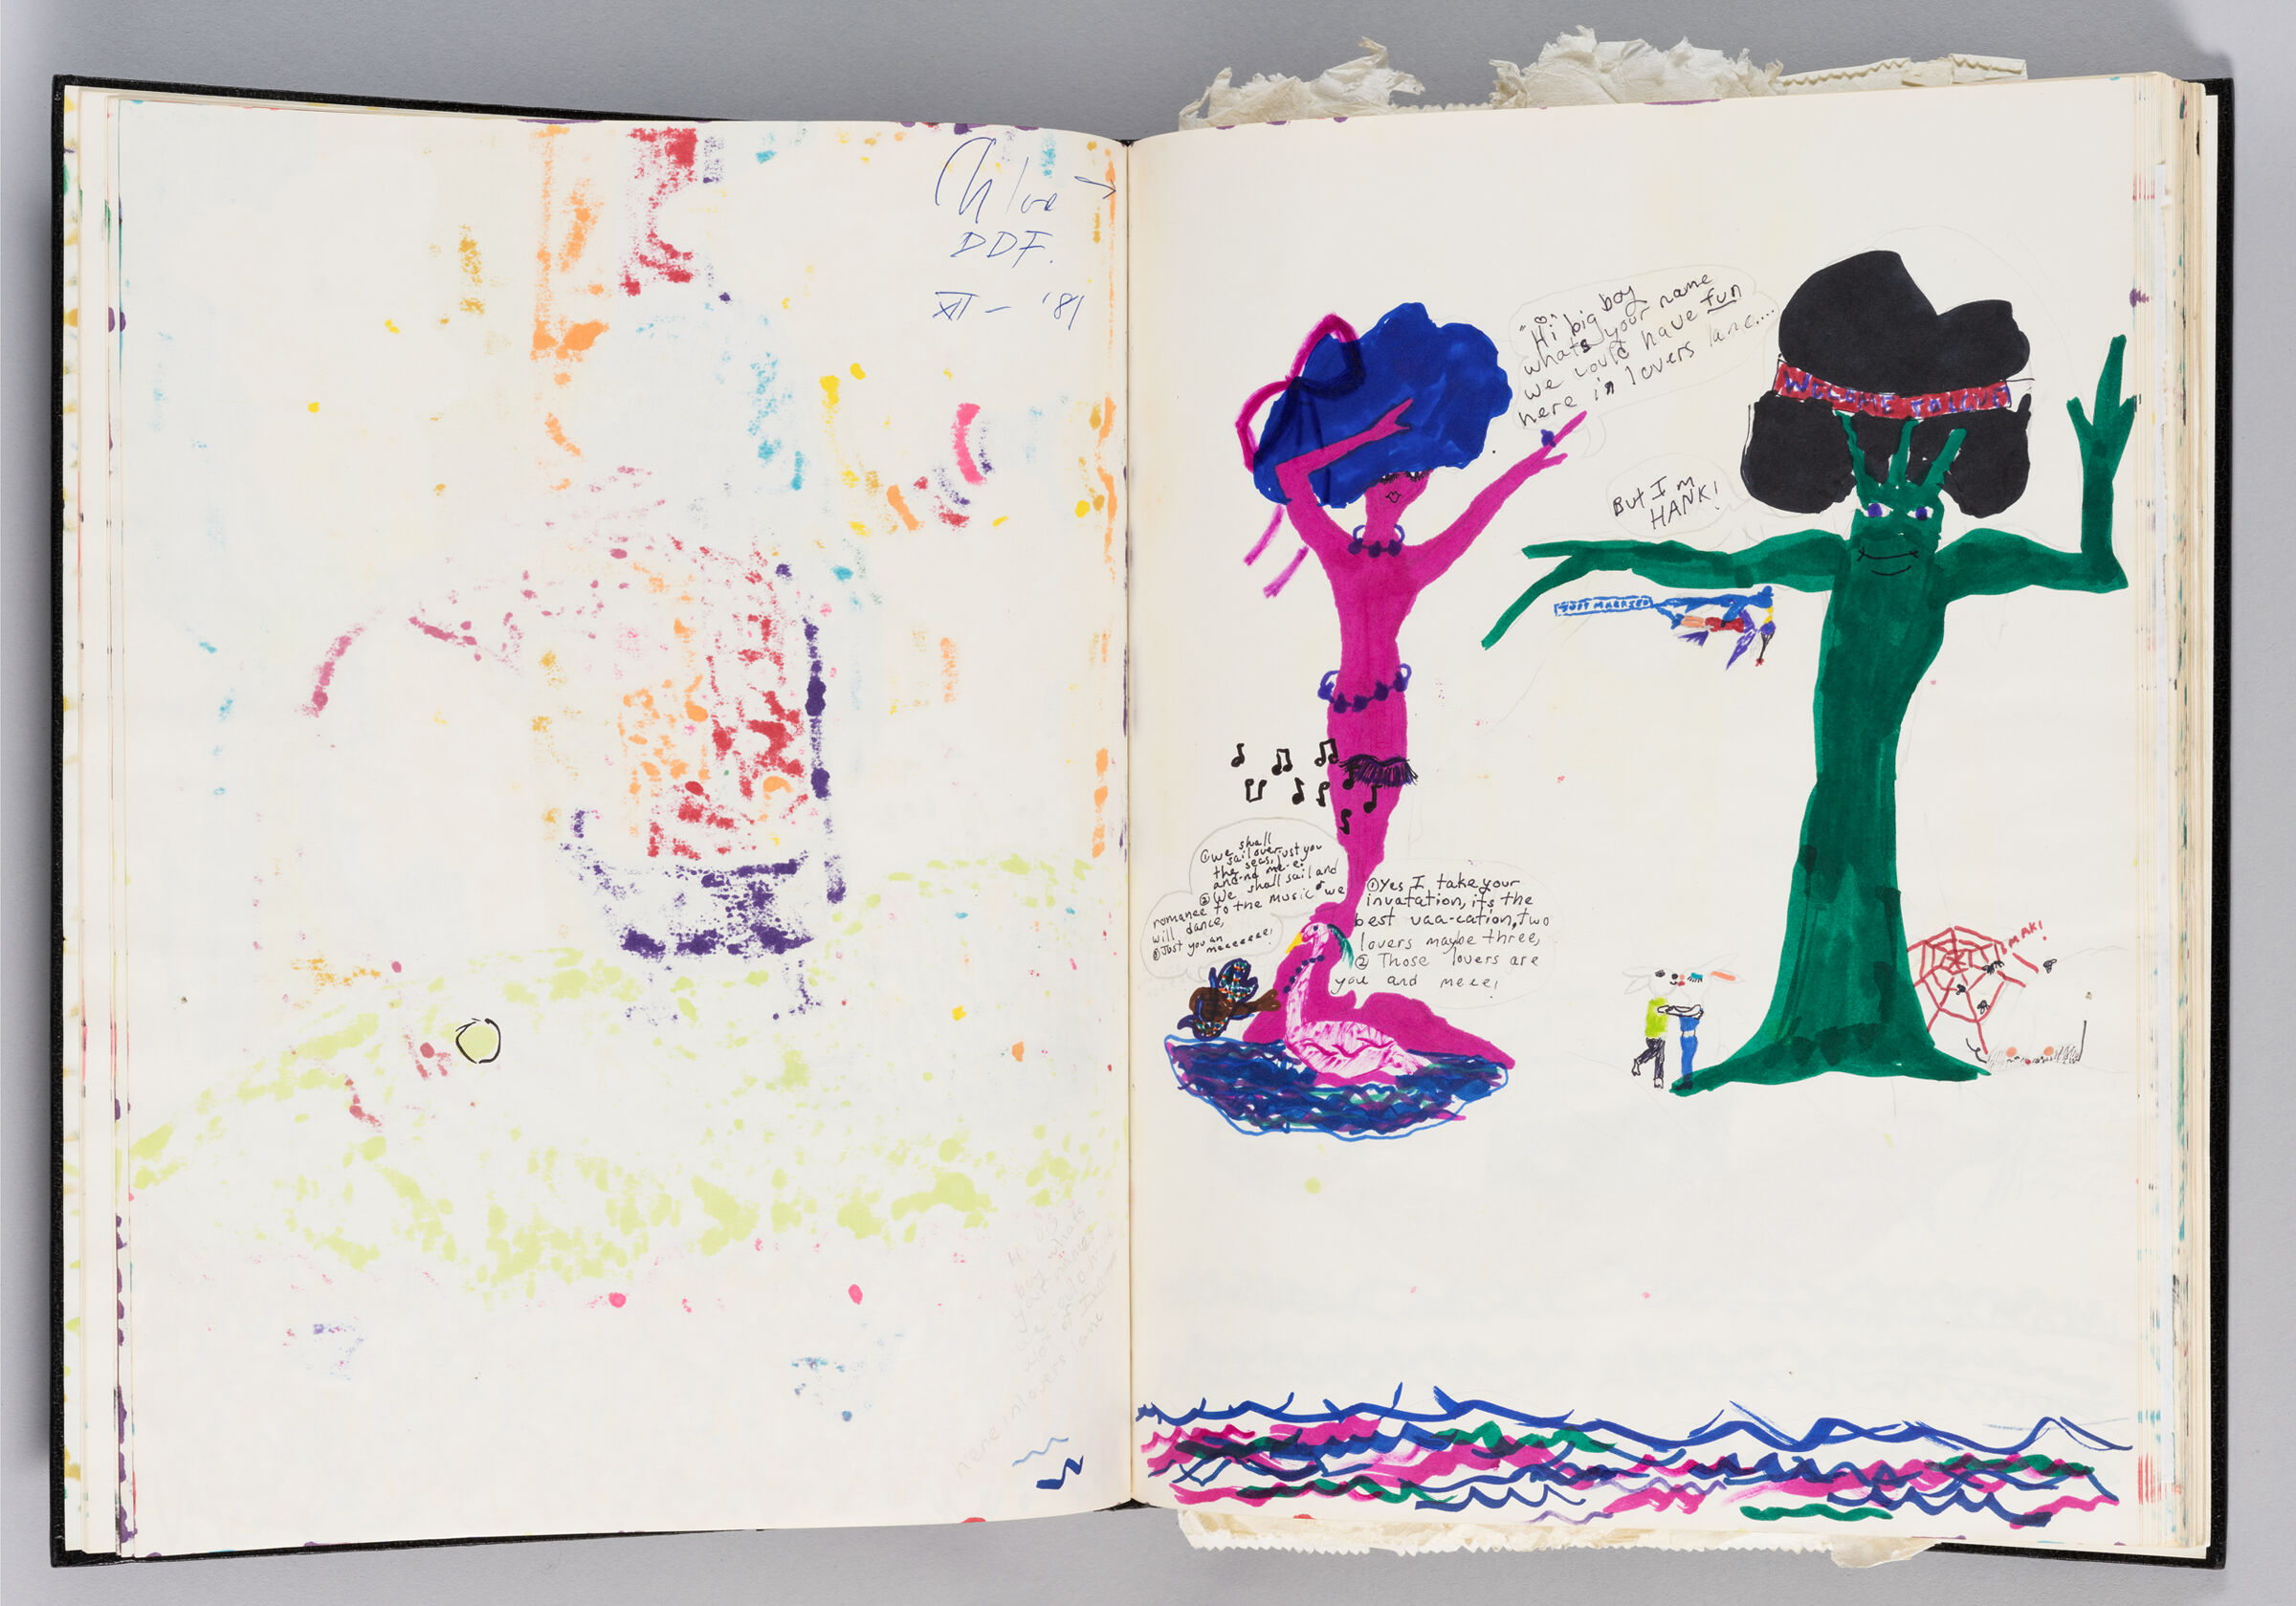 Untitled (Bleed-Through Of Previous Page And Note, Left Page); Untitled (Children's Drawing, Right Page)
